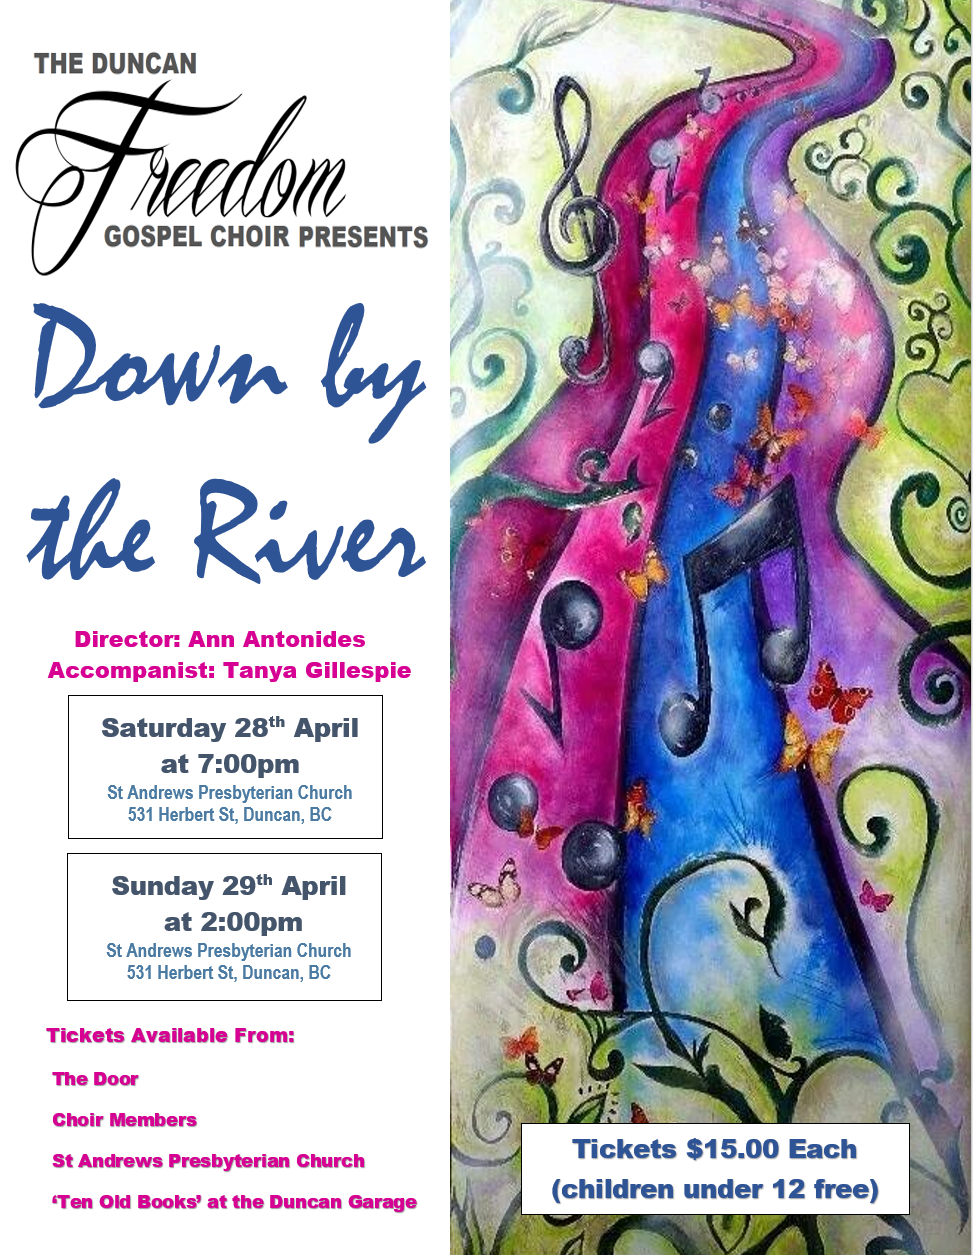 “Down by the River” – In Duncan!